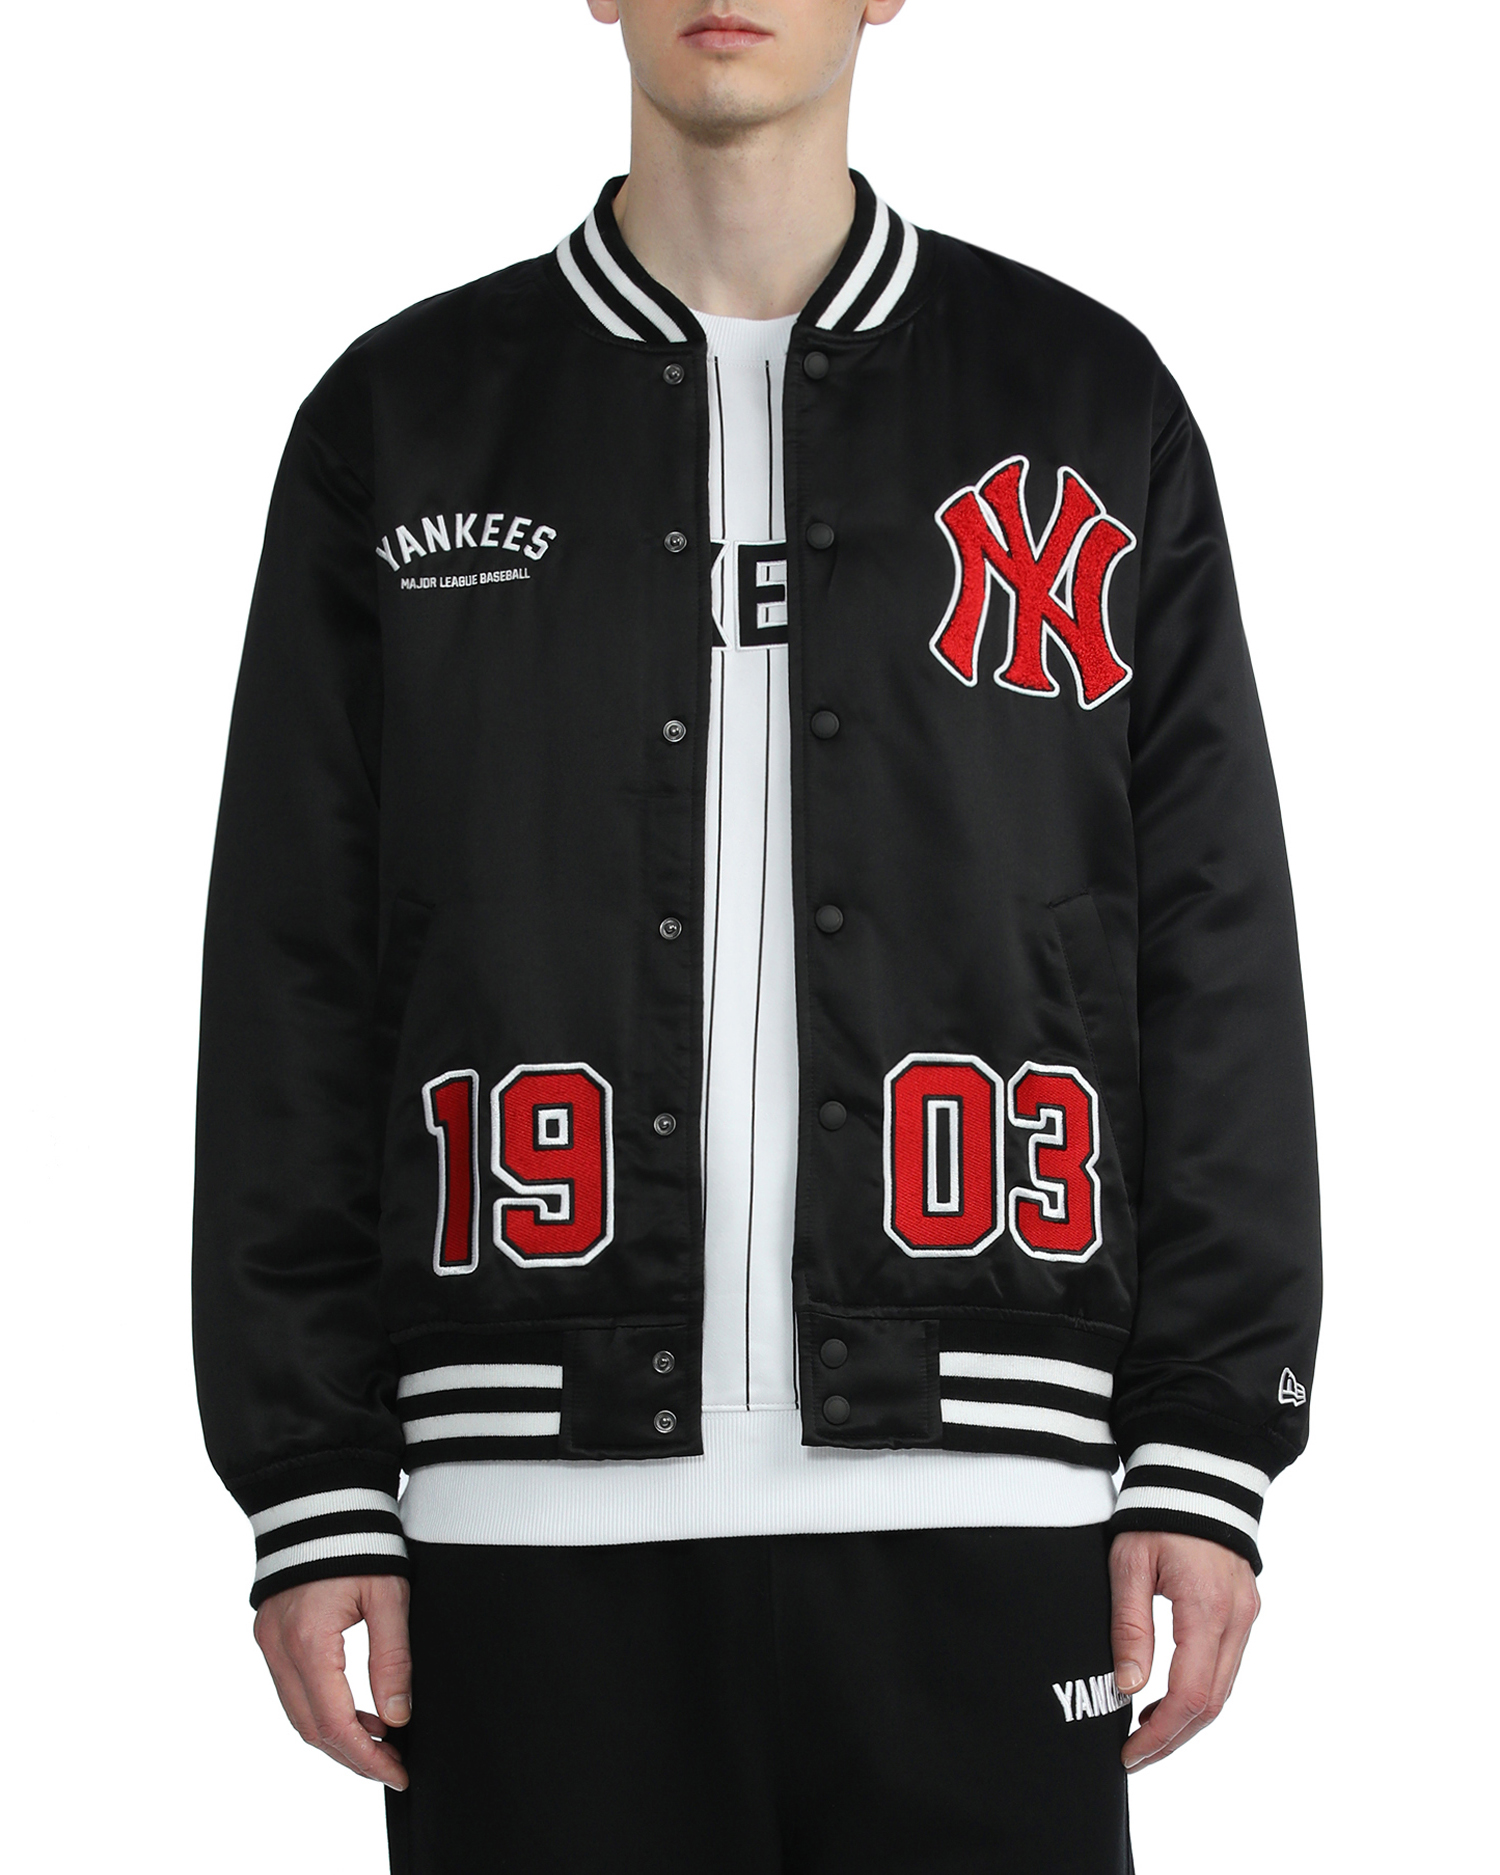 MLB New York Yankees Ashmead jacket  Majestic  SportingPlus  Passion for  Sport